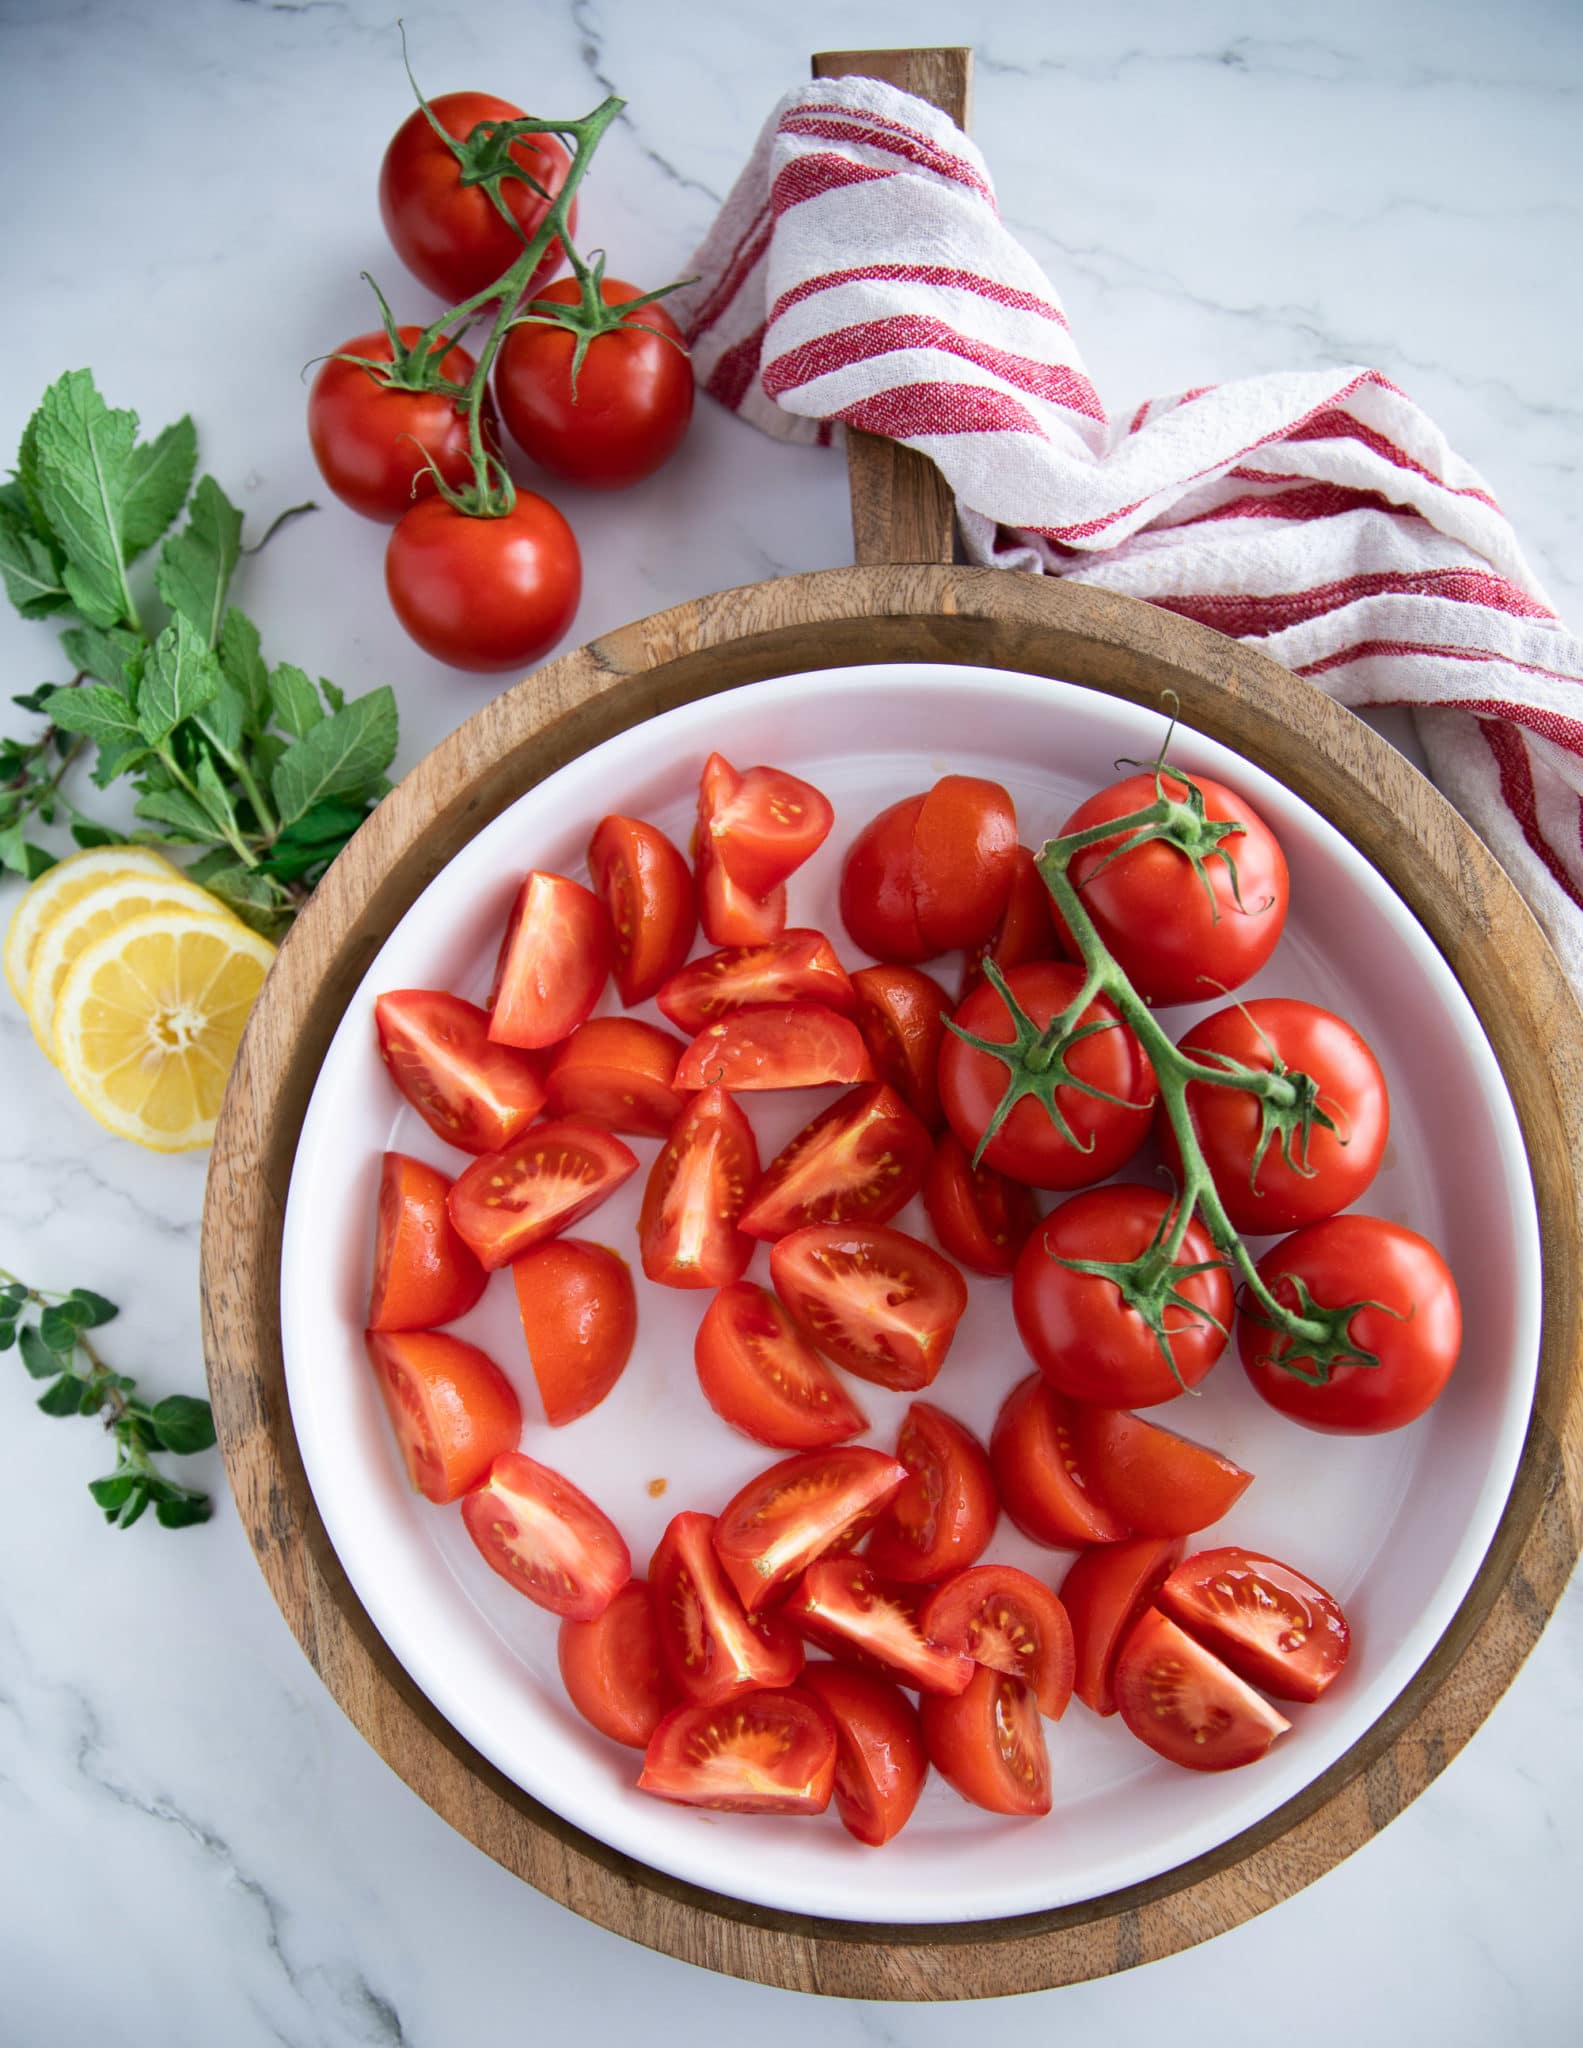 A large salad plate with fresh tomatoes quartered ready to assemble the tomato salad recipe